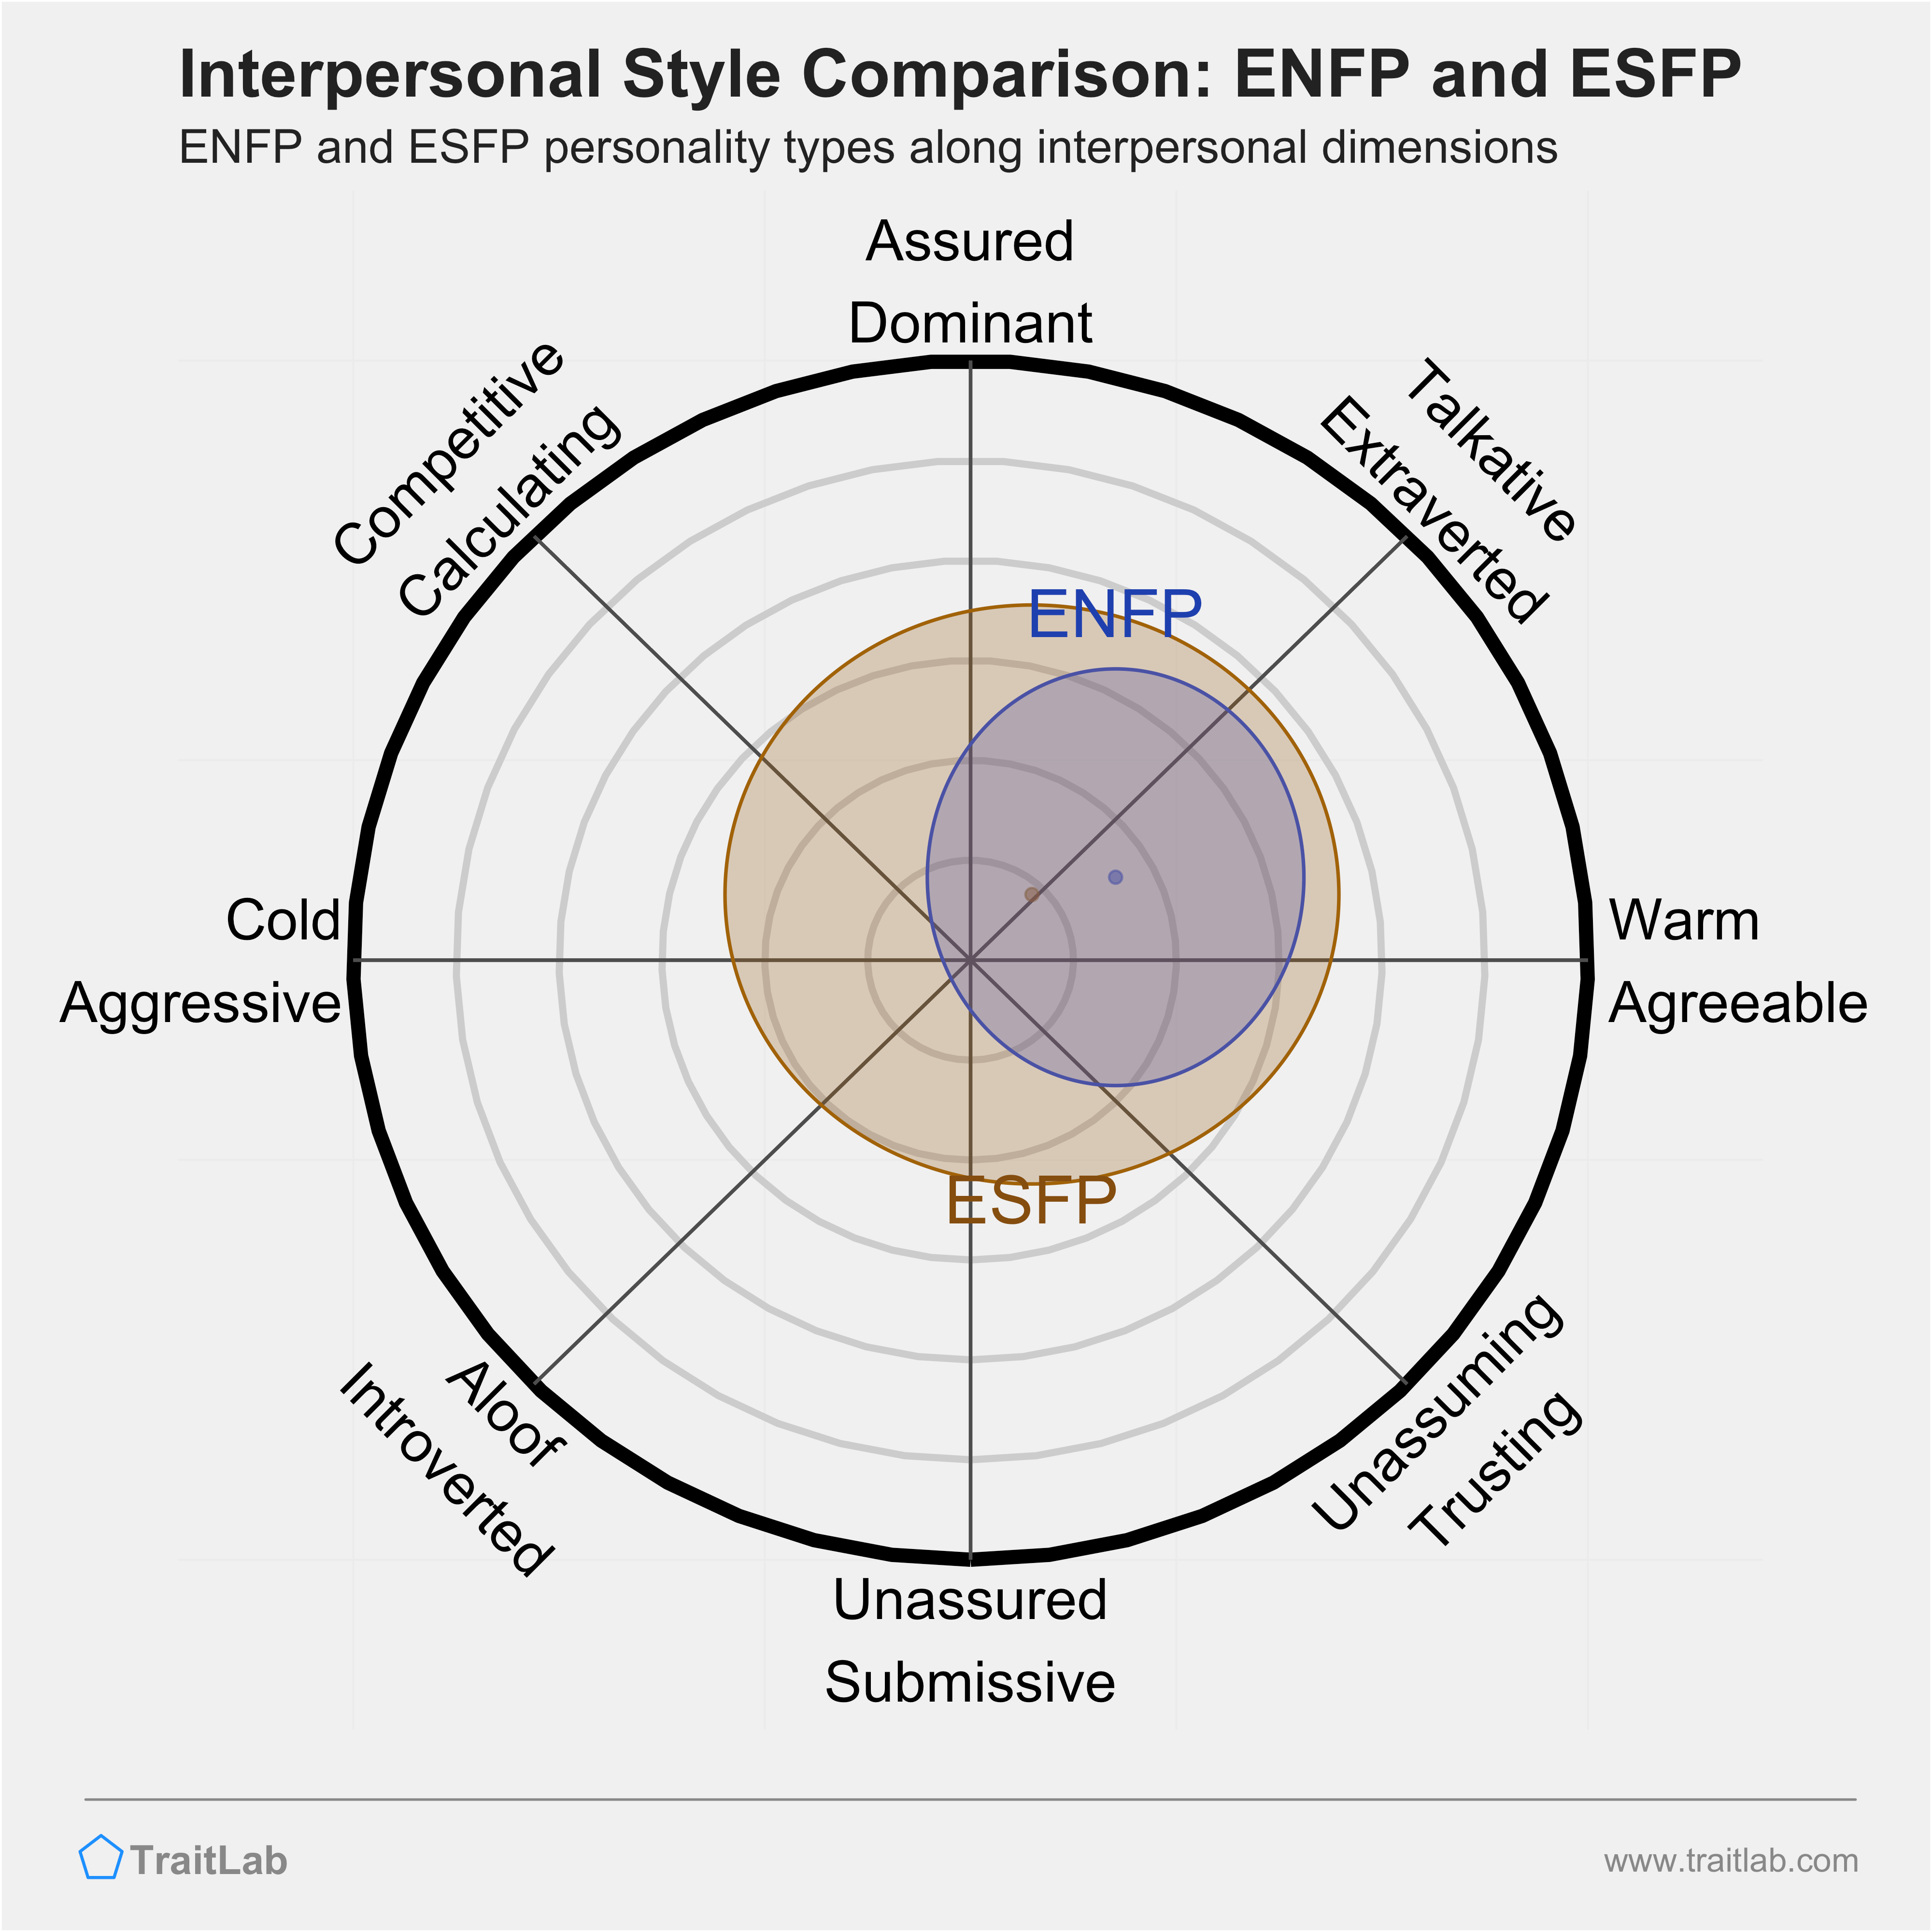 ENFP and ESFP comparison across interpersonal dimensions